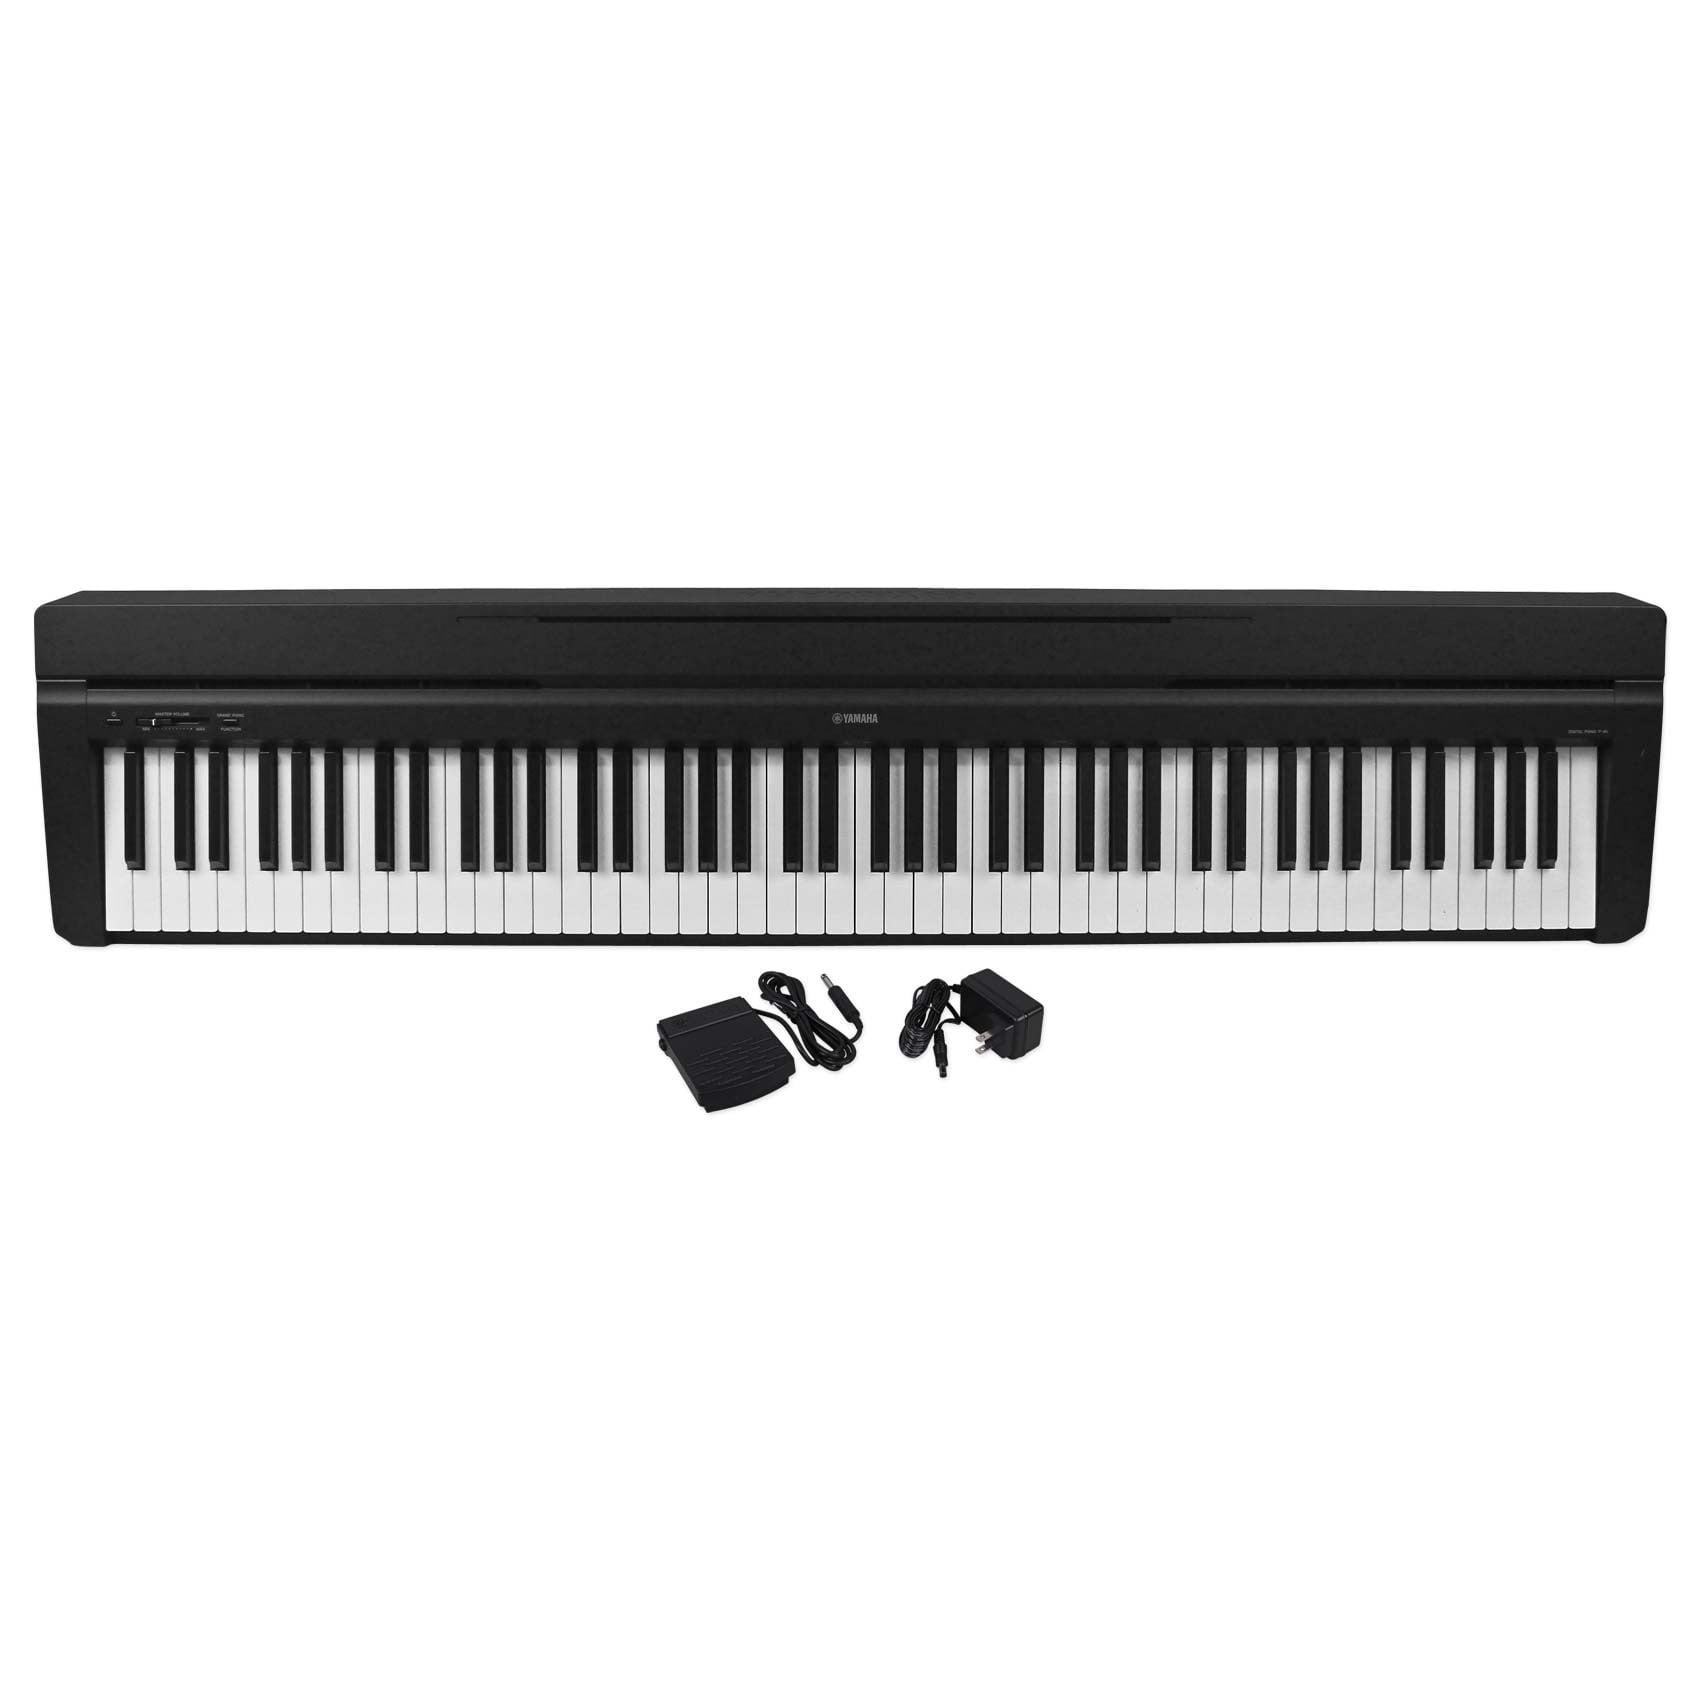 P-45 - Accessories - Portables - Pianos - Musical Instruments